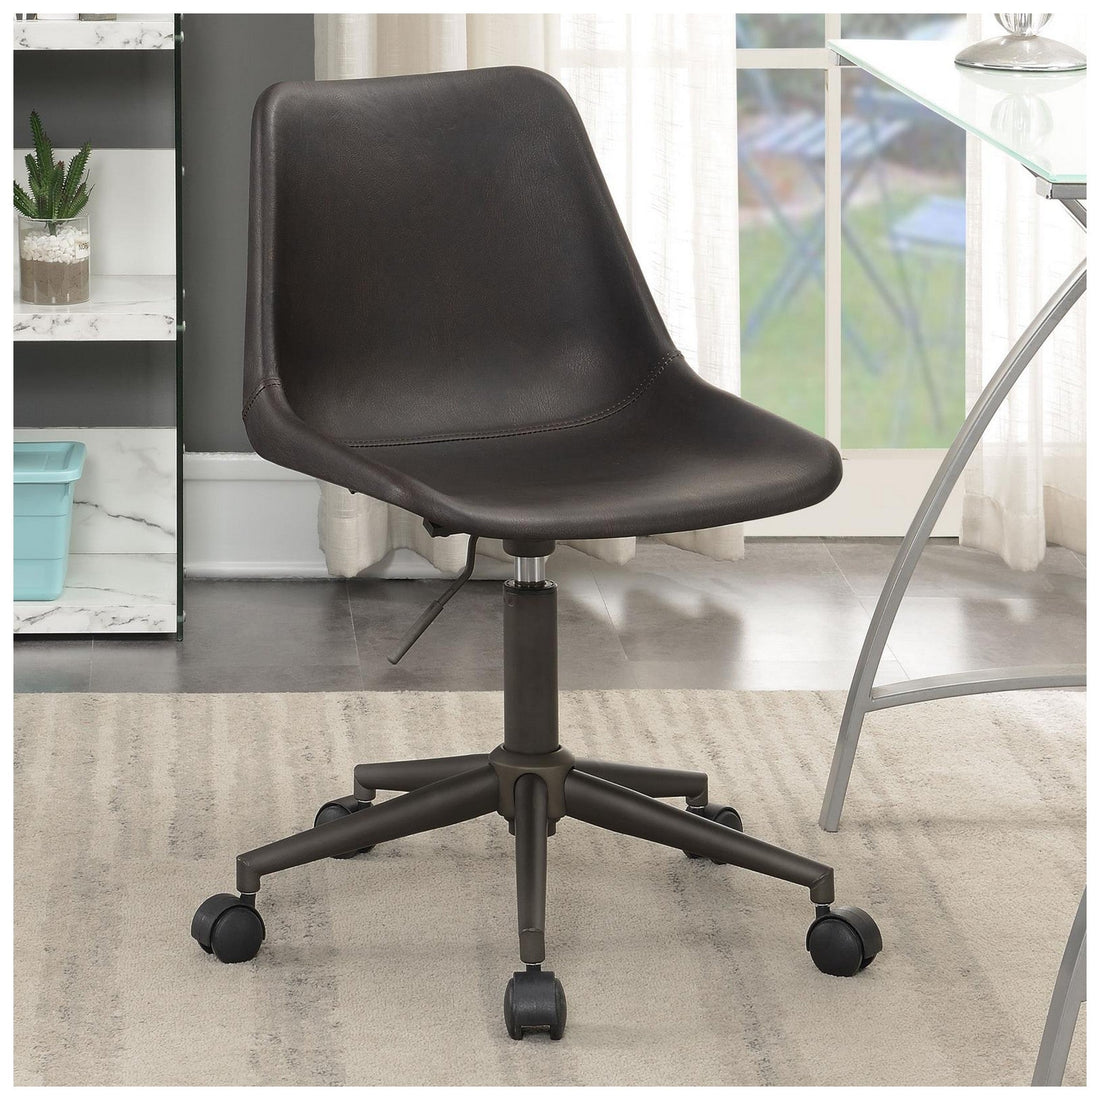 Carnell Adjustable Height Office Chair with Casters Brown and Rustic Taupe 803378